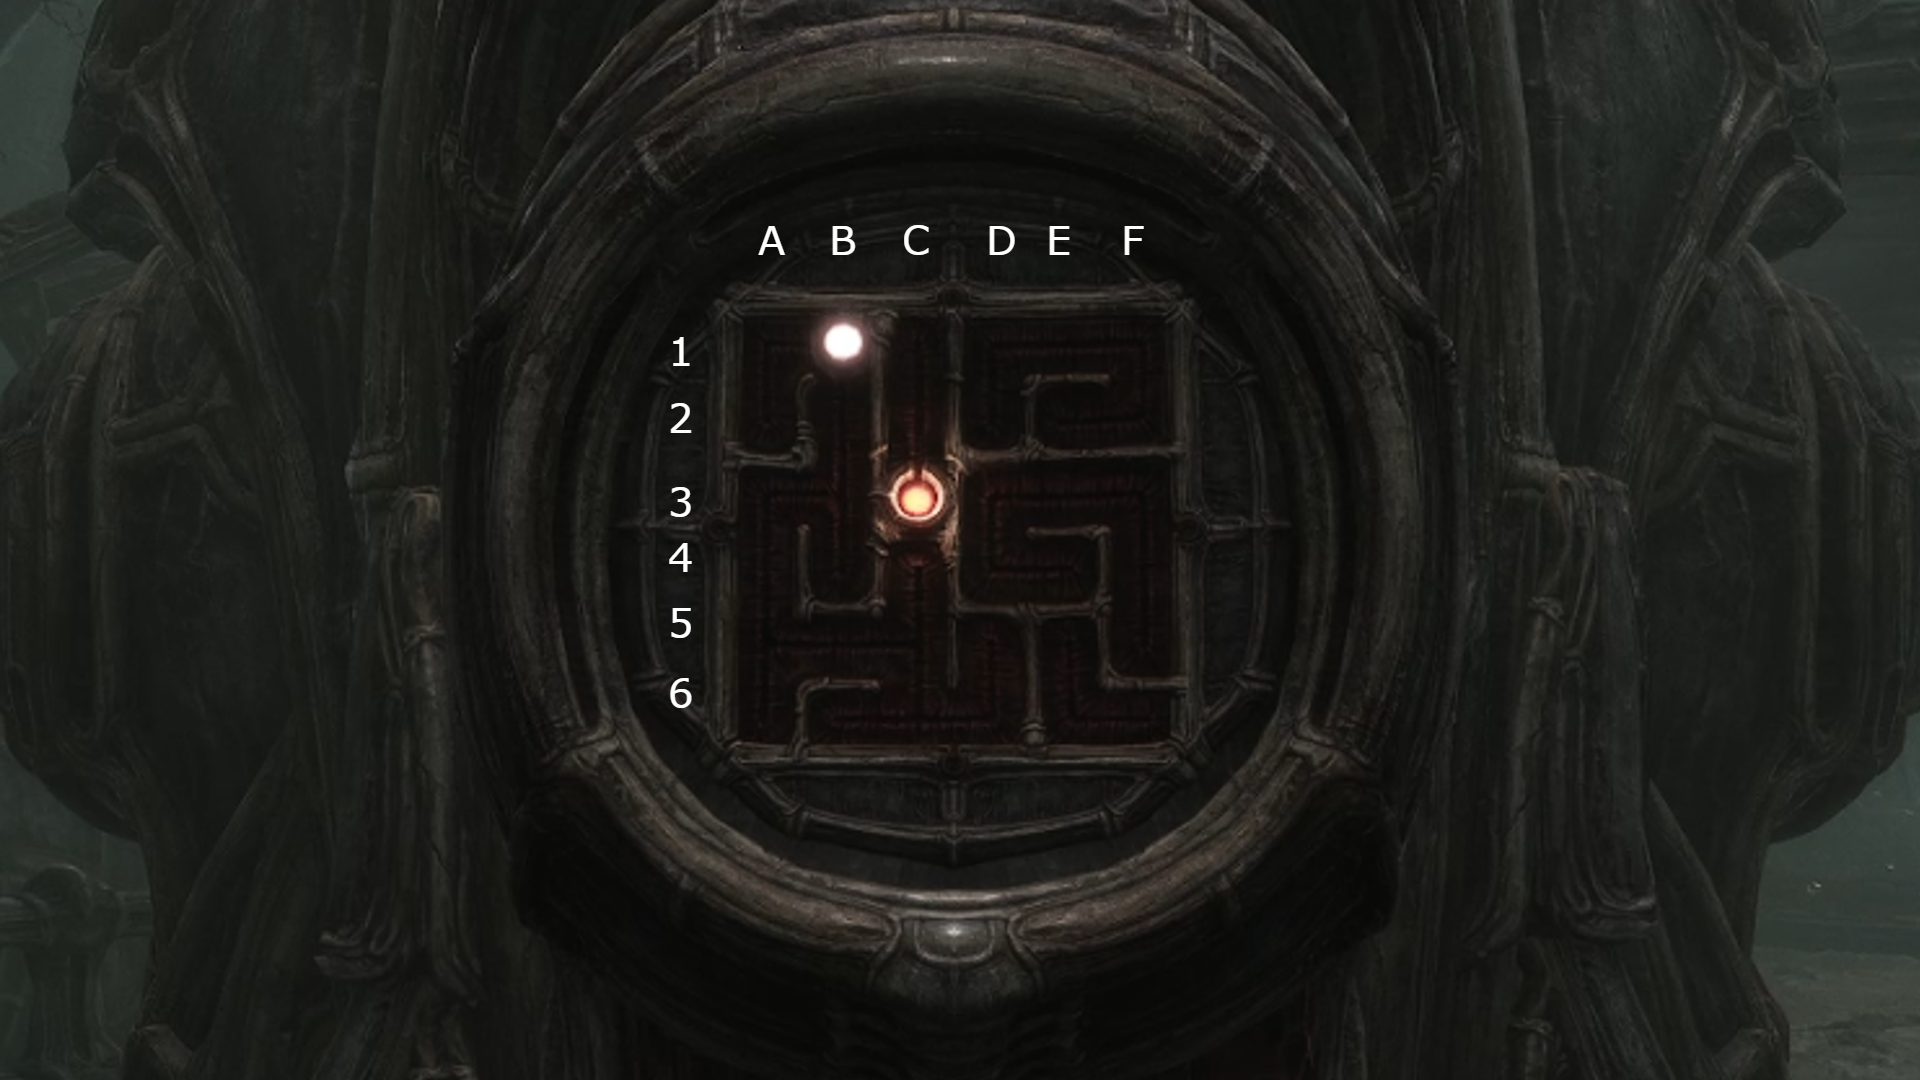 Scorn Puzzle Solutions: The maze puzzle can be seen